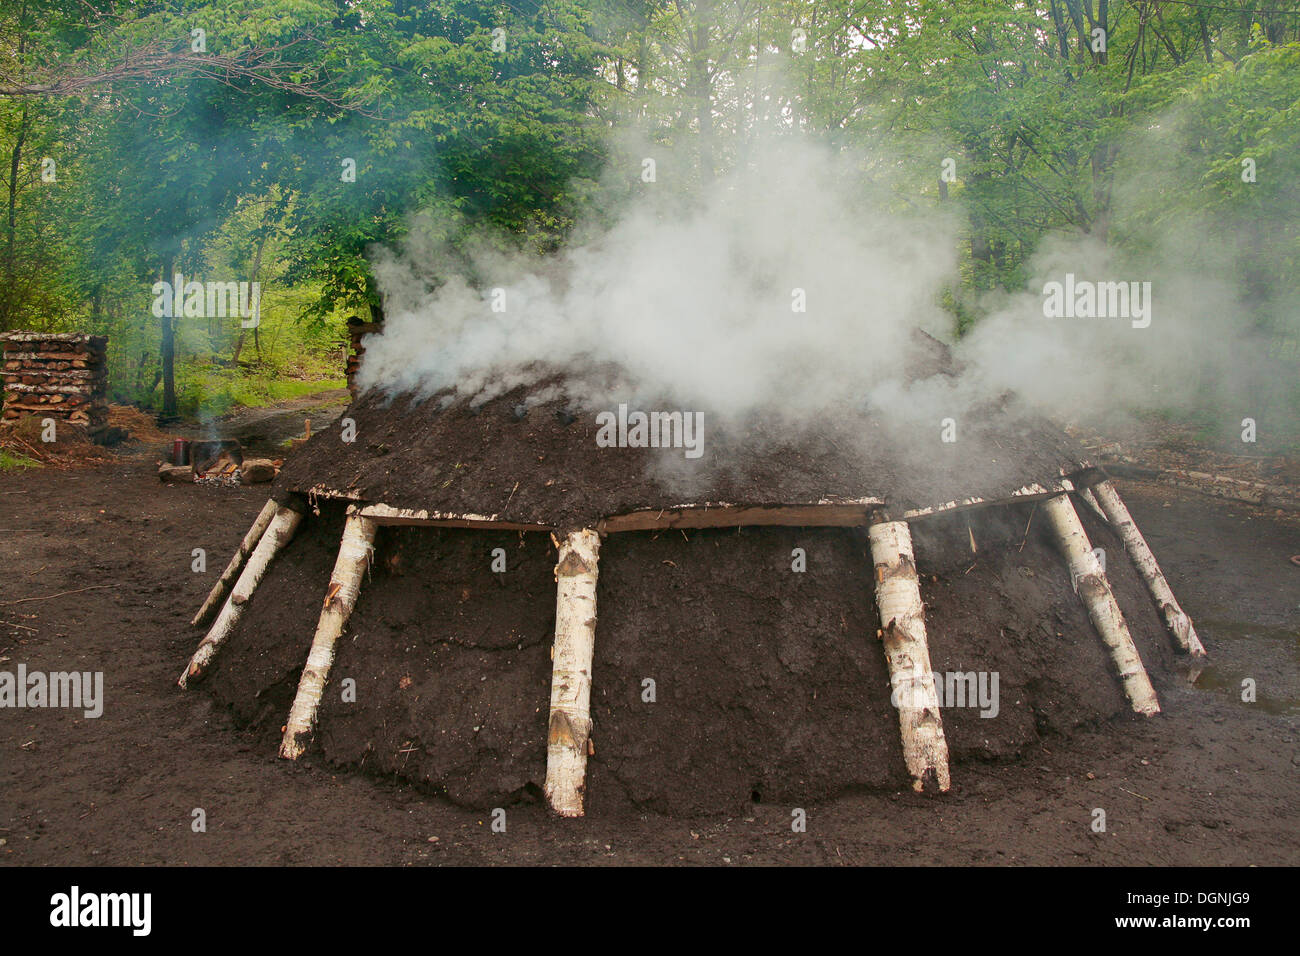 Smoking charcoal kiln in the process of carbonisation of wood to charcoal, Freilichtmuseum Hessenpark open-air museum Stock Photo